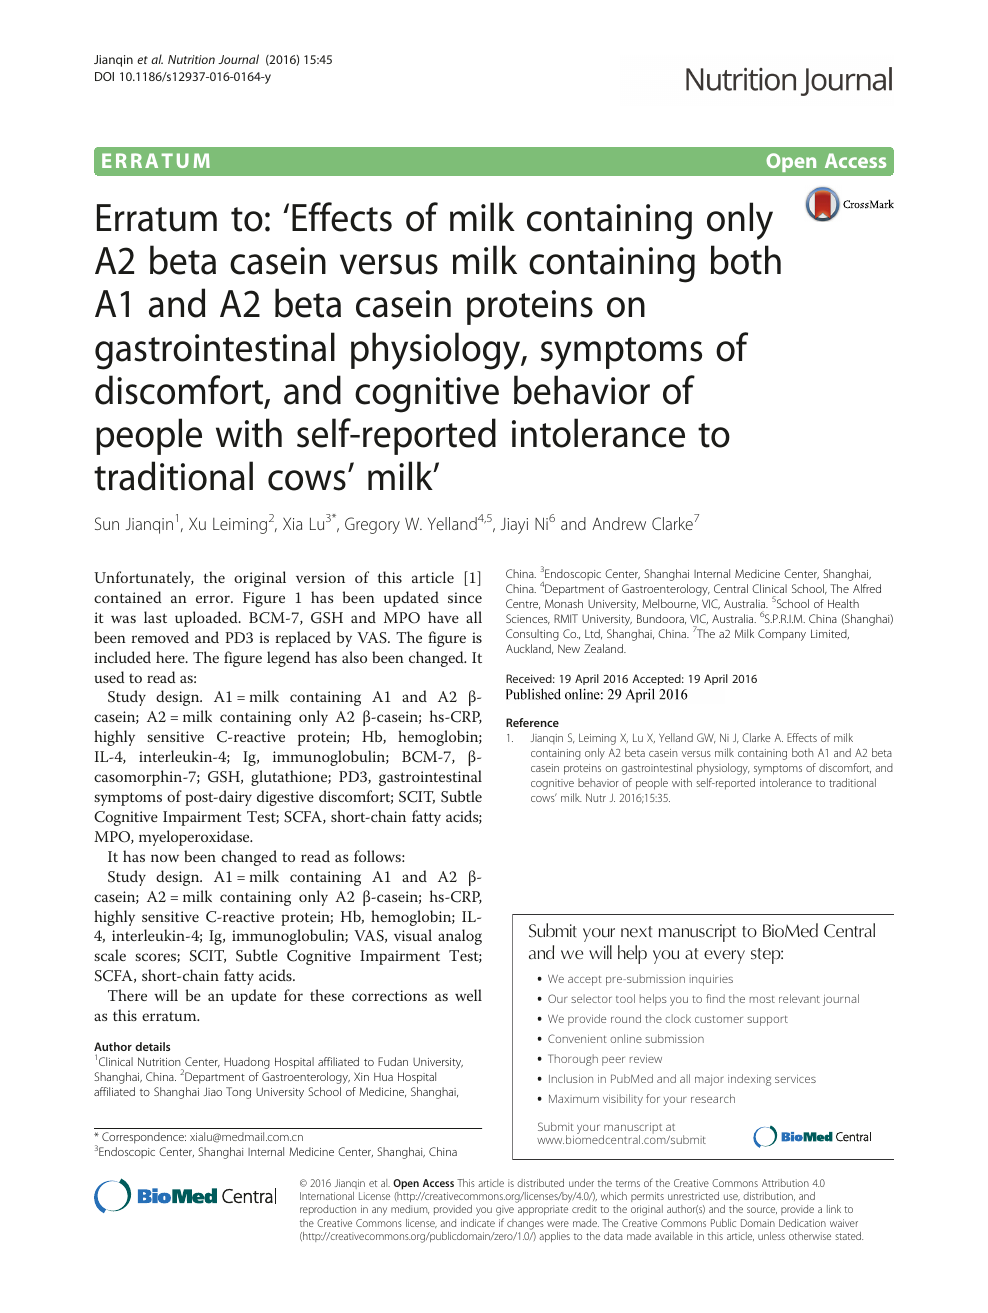 Erratum To Effects Of Milk Containing Only Beta Casein Versus Milk Containing Both A1 And Beta Casein Proteins On Gastrointestinal Physiology Symptoms Of Discomfort And Cognitive Behavior Of People With